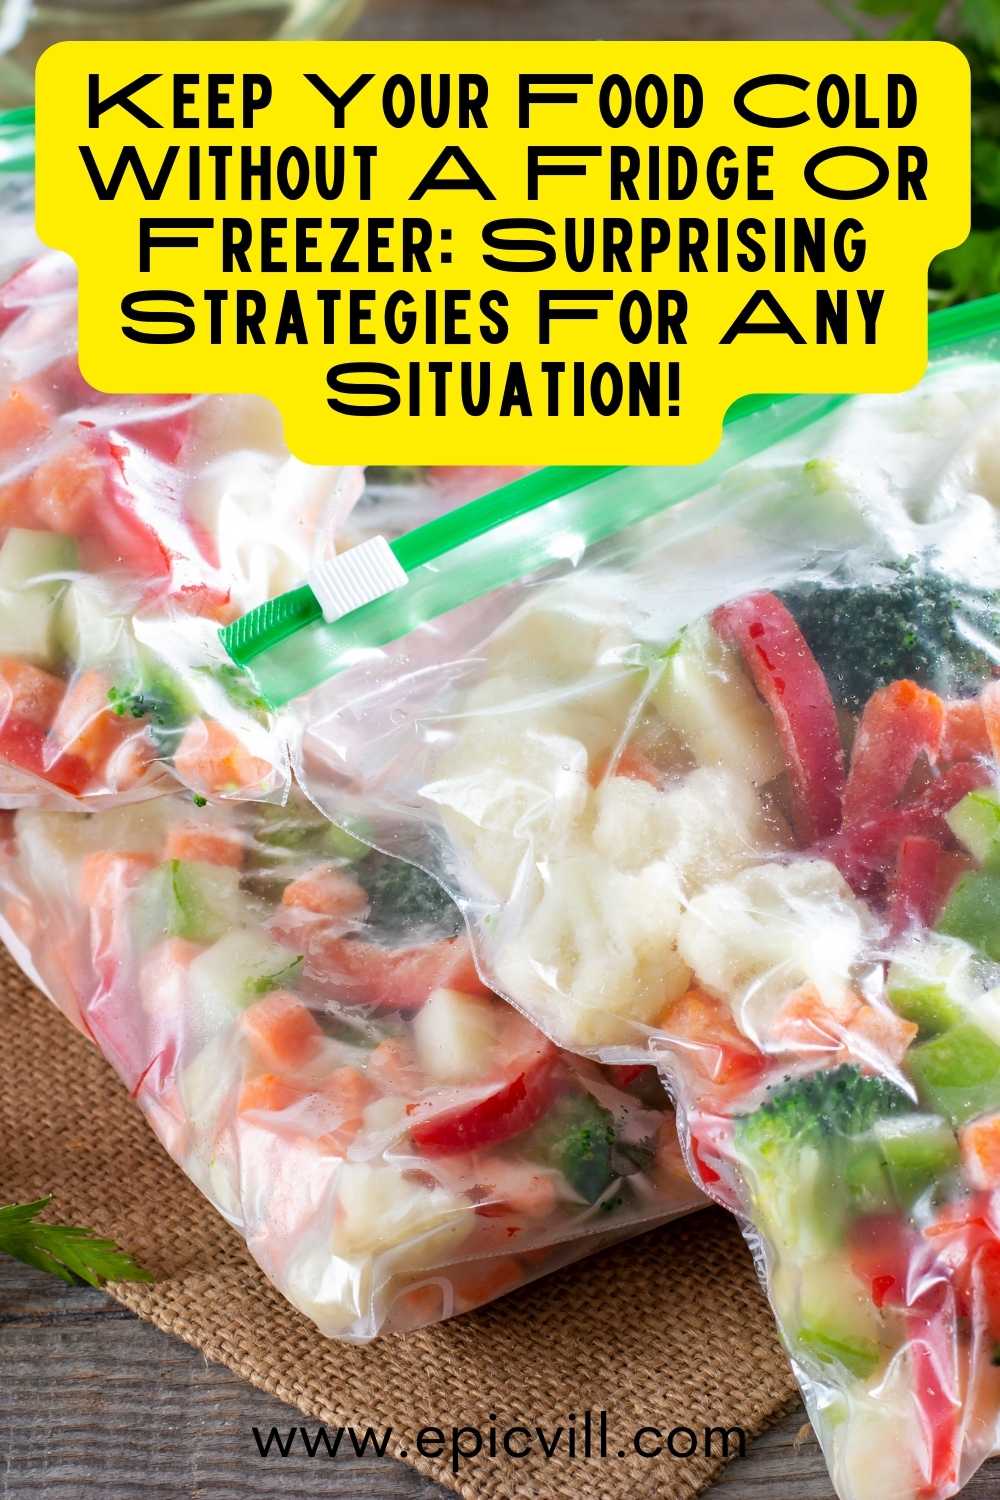 Keep Your Food Cold Without A Fridge Or Freezer: Surprising Strategies ...